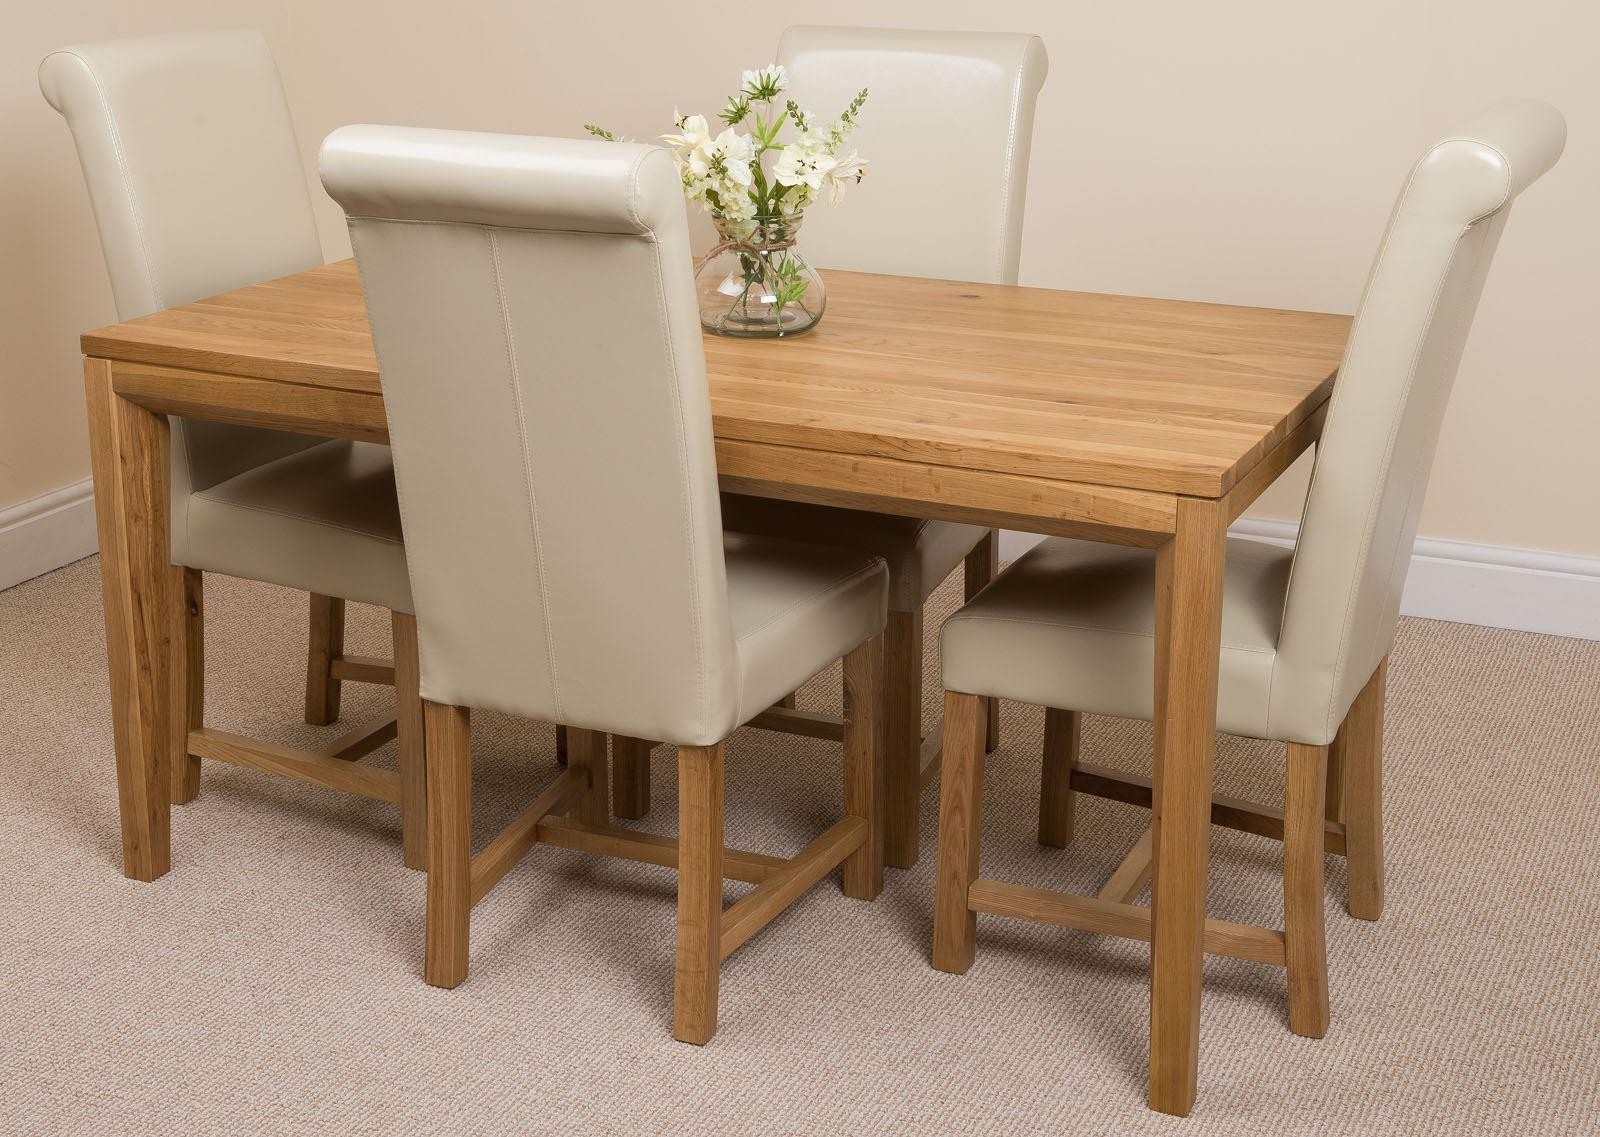 Bevel solid oak 150cm dining table & 4 white washington leather chairs